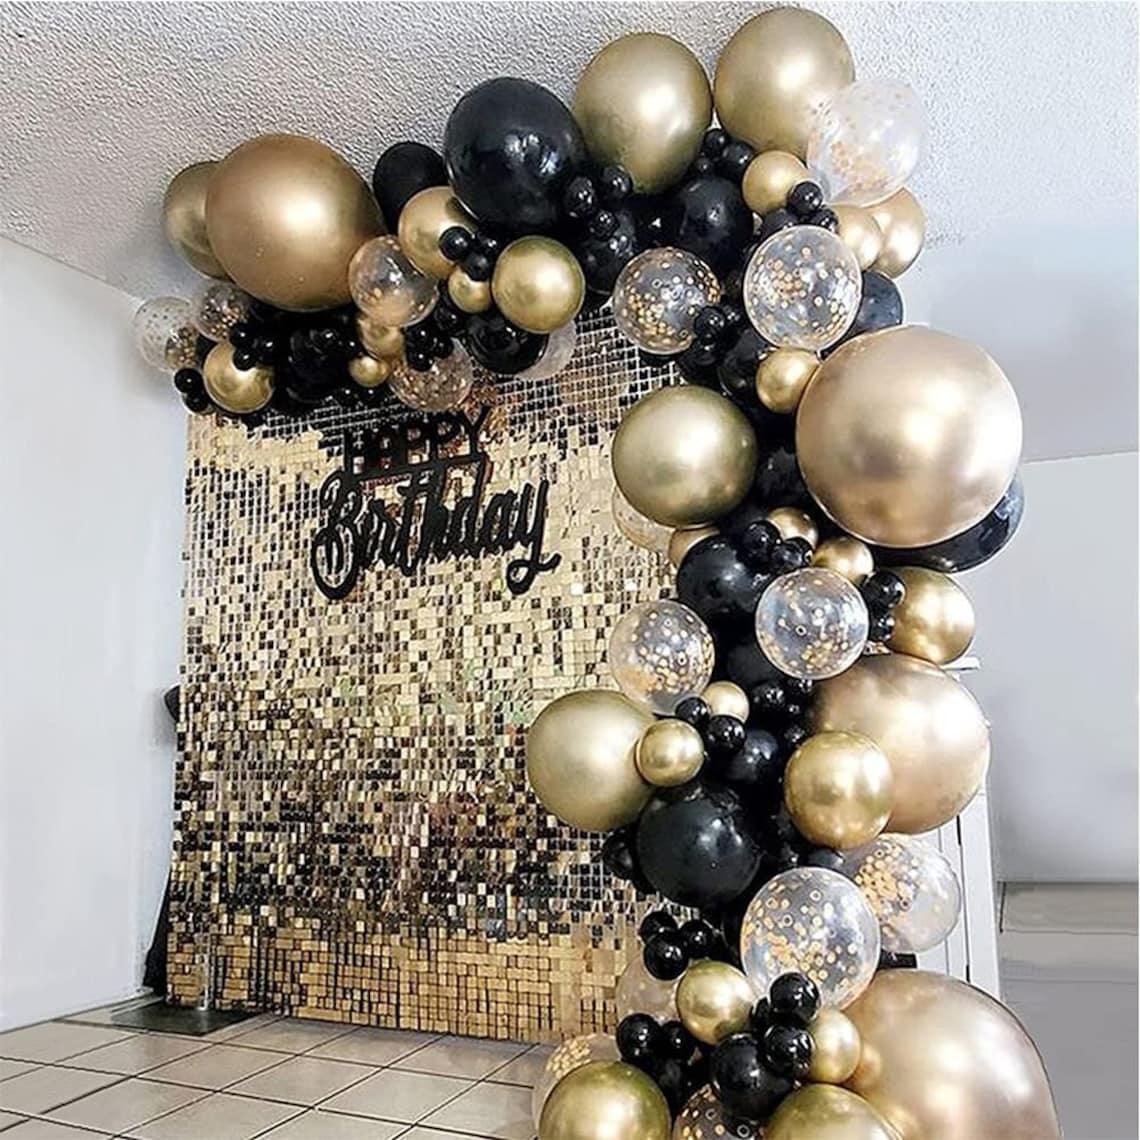 Louis Vuitton Inspired Brown 12 inch Latex Balloons with Gold Logo for all  occasions Sweet Sixteen, Weddings, Baby Showers, Birthdays, Bridal,  Quinceñera